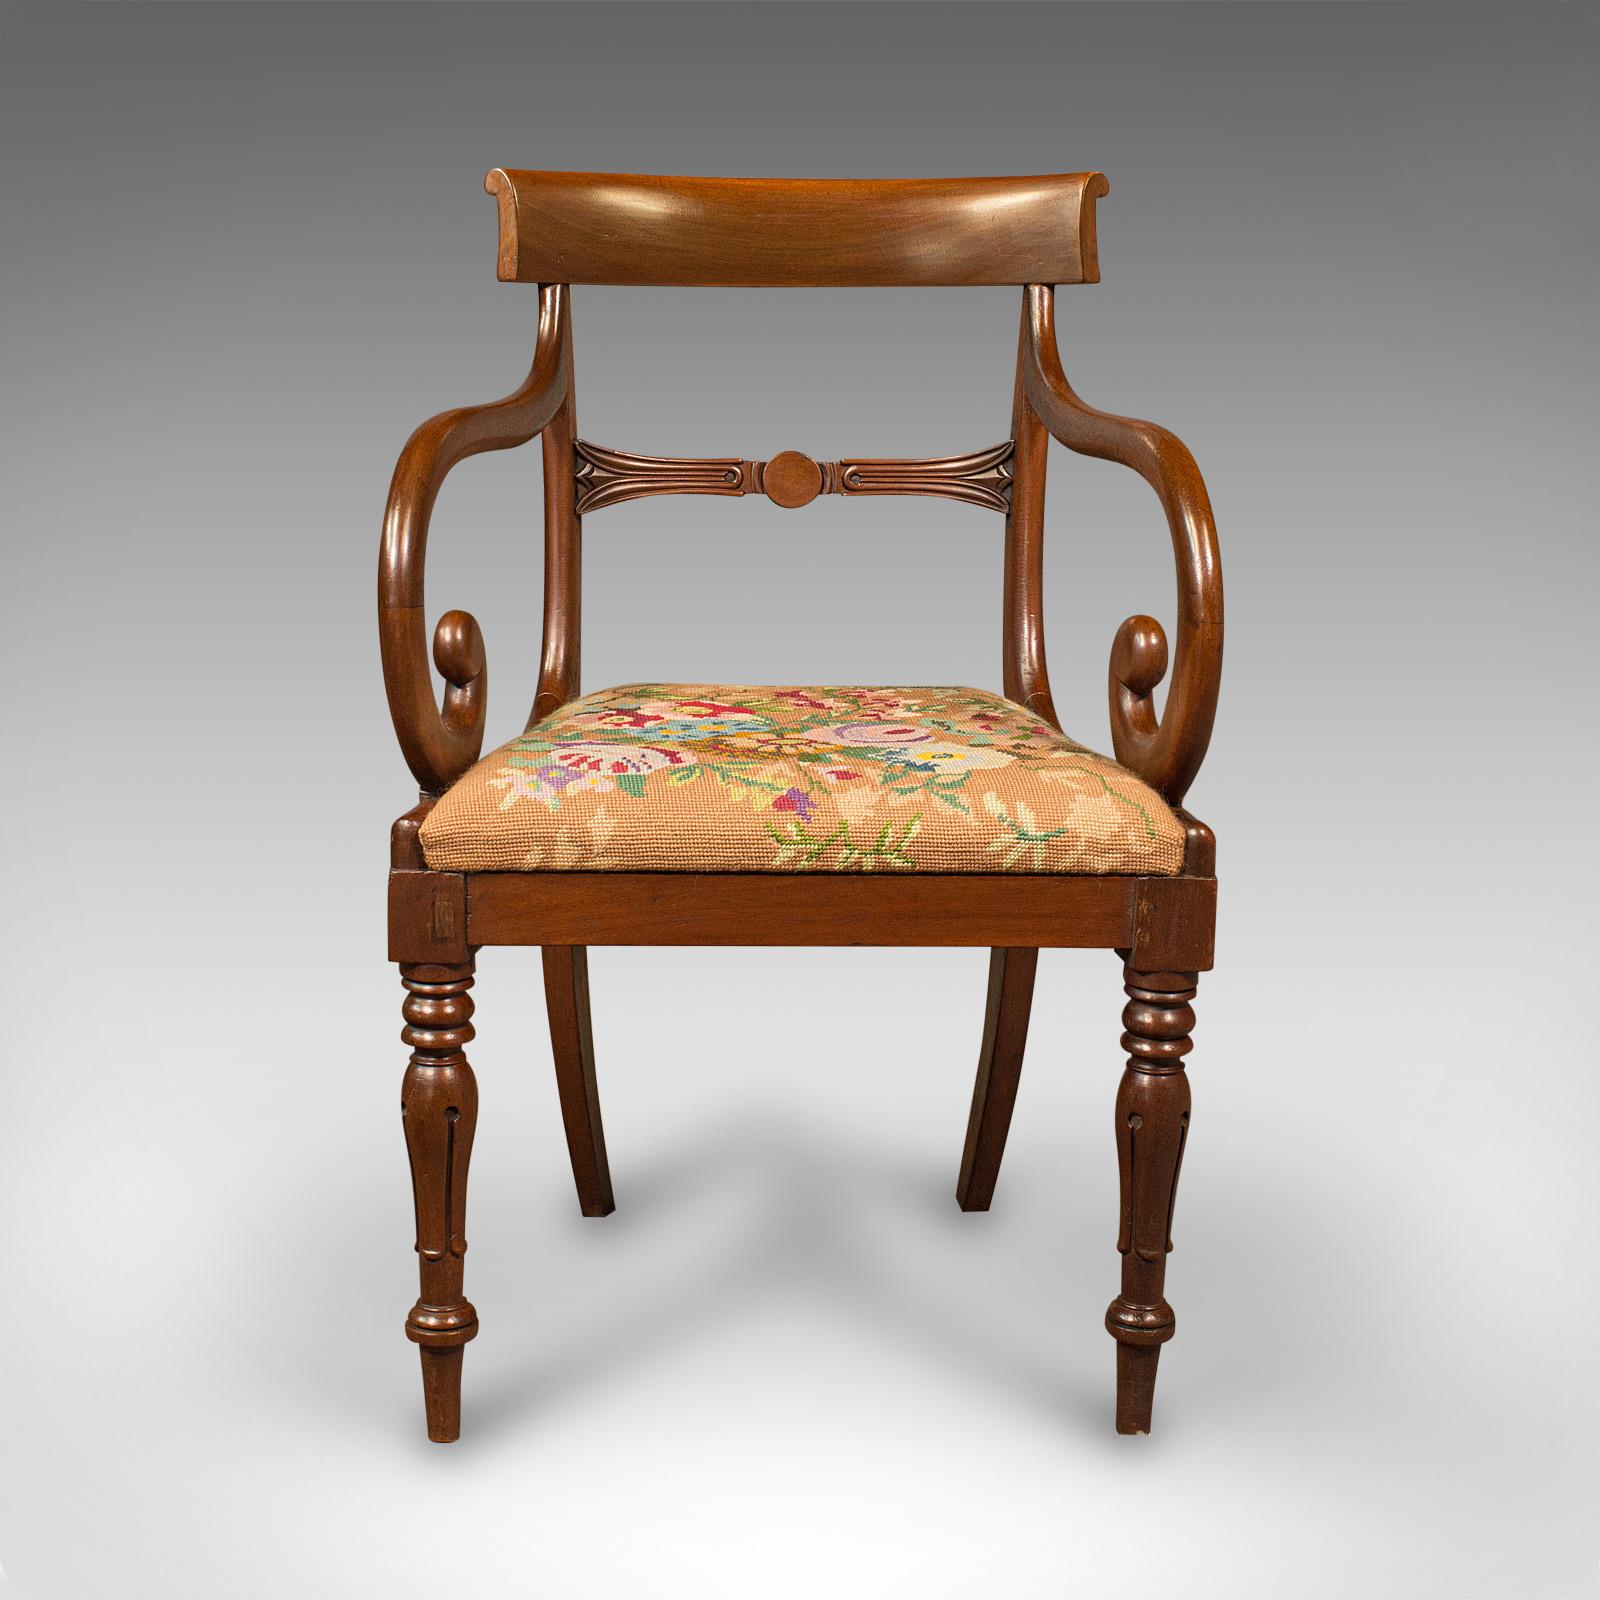 This is an antique scroll arm chair. An English, mahogany armchair with needlepoint upholstery, dating to the Regency period, circa 1830.

Striking serpentine form with an attractive finish
Displaying a desirable aged patina and in good order